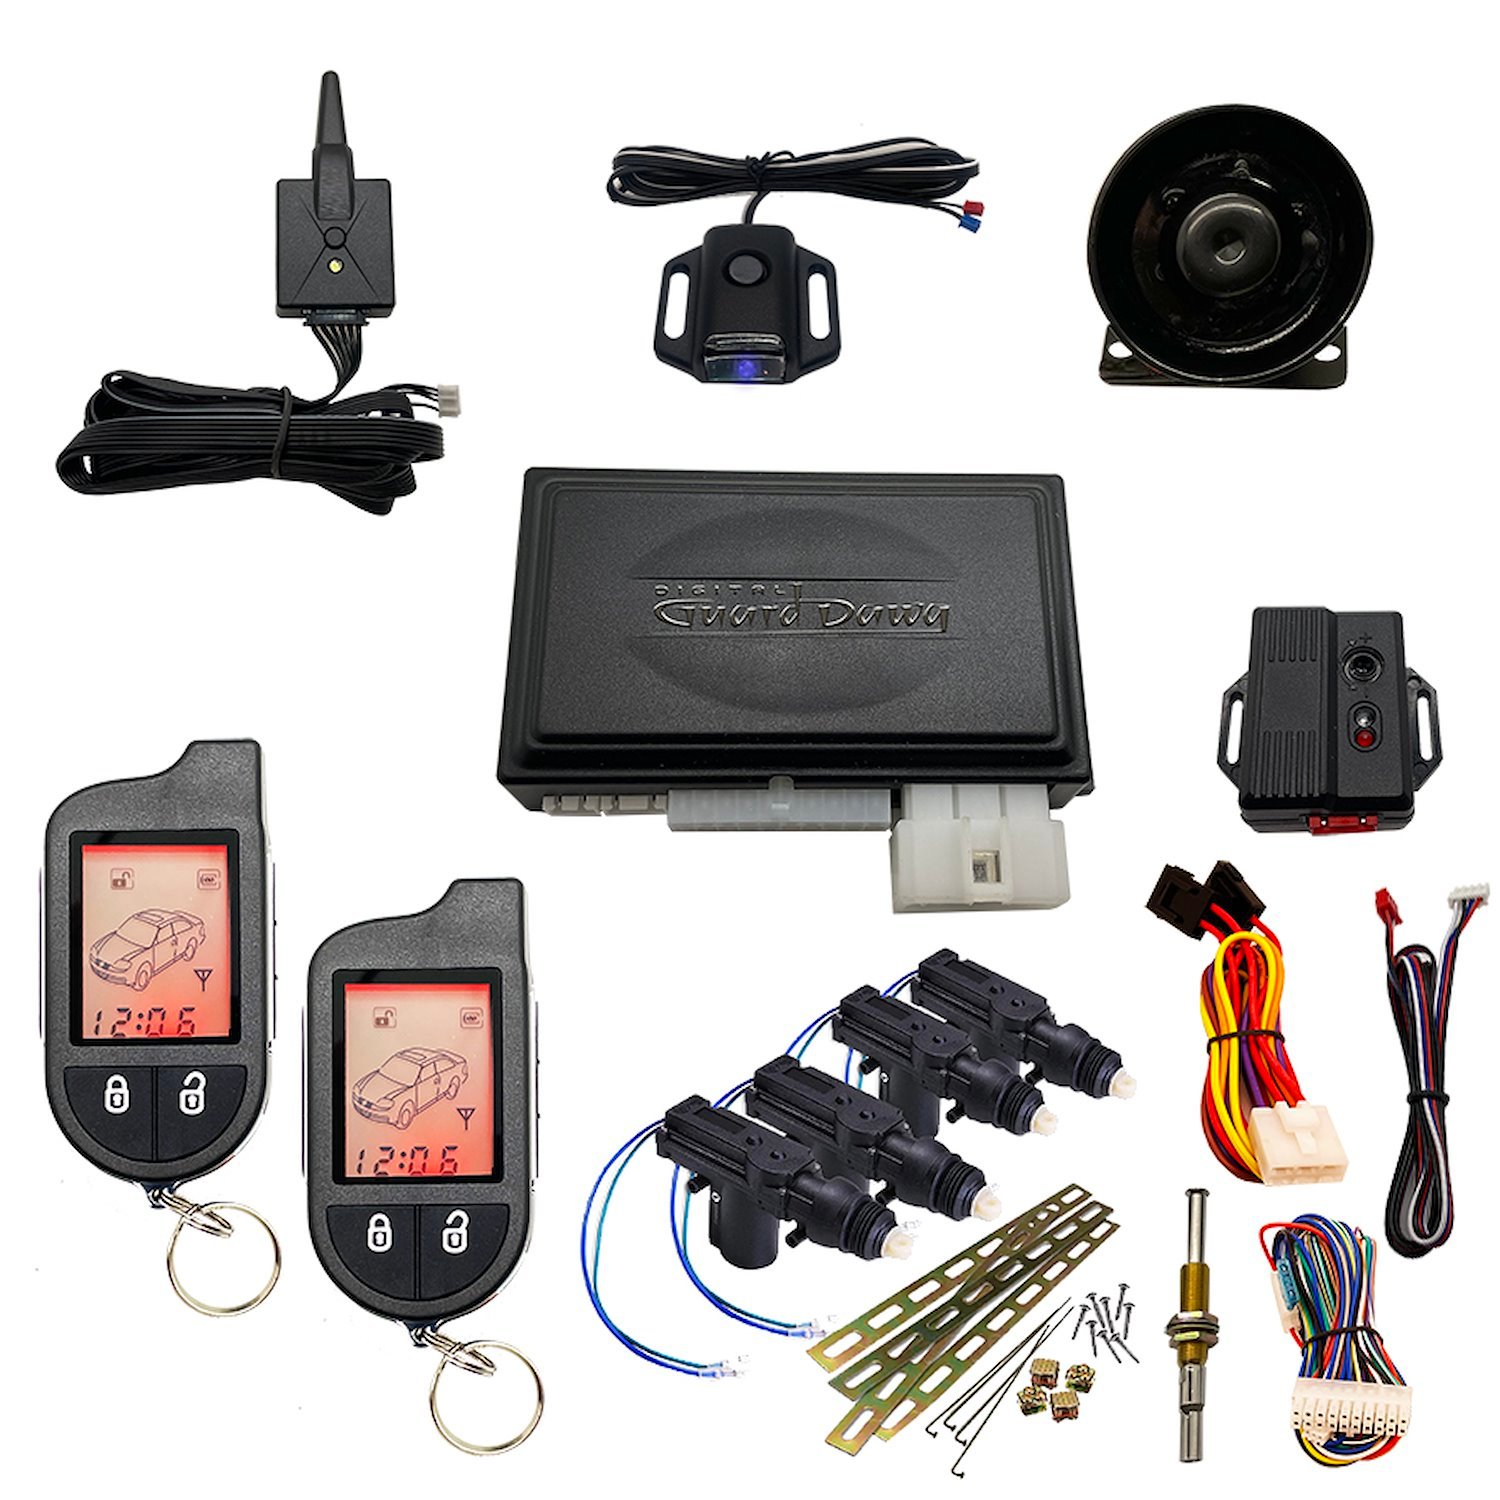 DGD-KY-ALM-RS2-4A Keyless Entry, Alarm System, and Remote Start, 2-Way, w/4-Door Actuator Kit